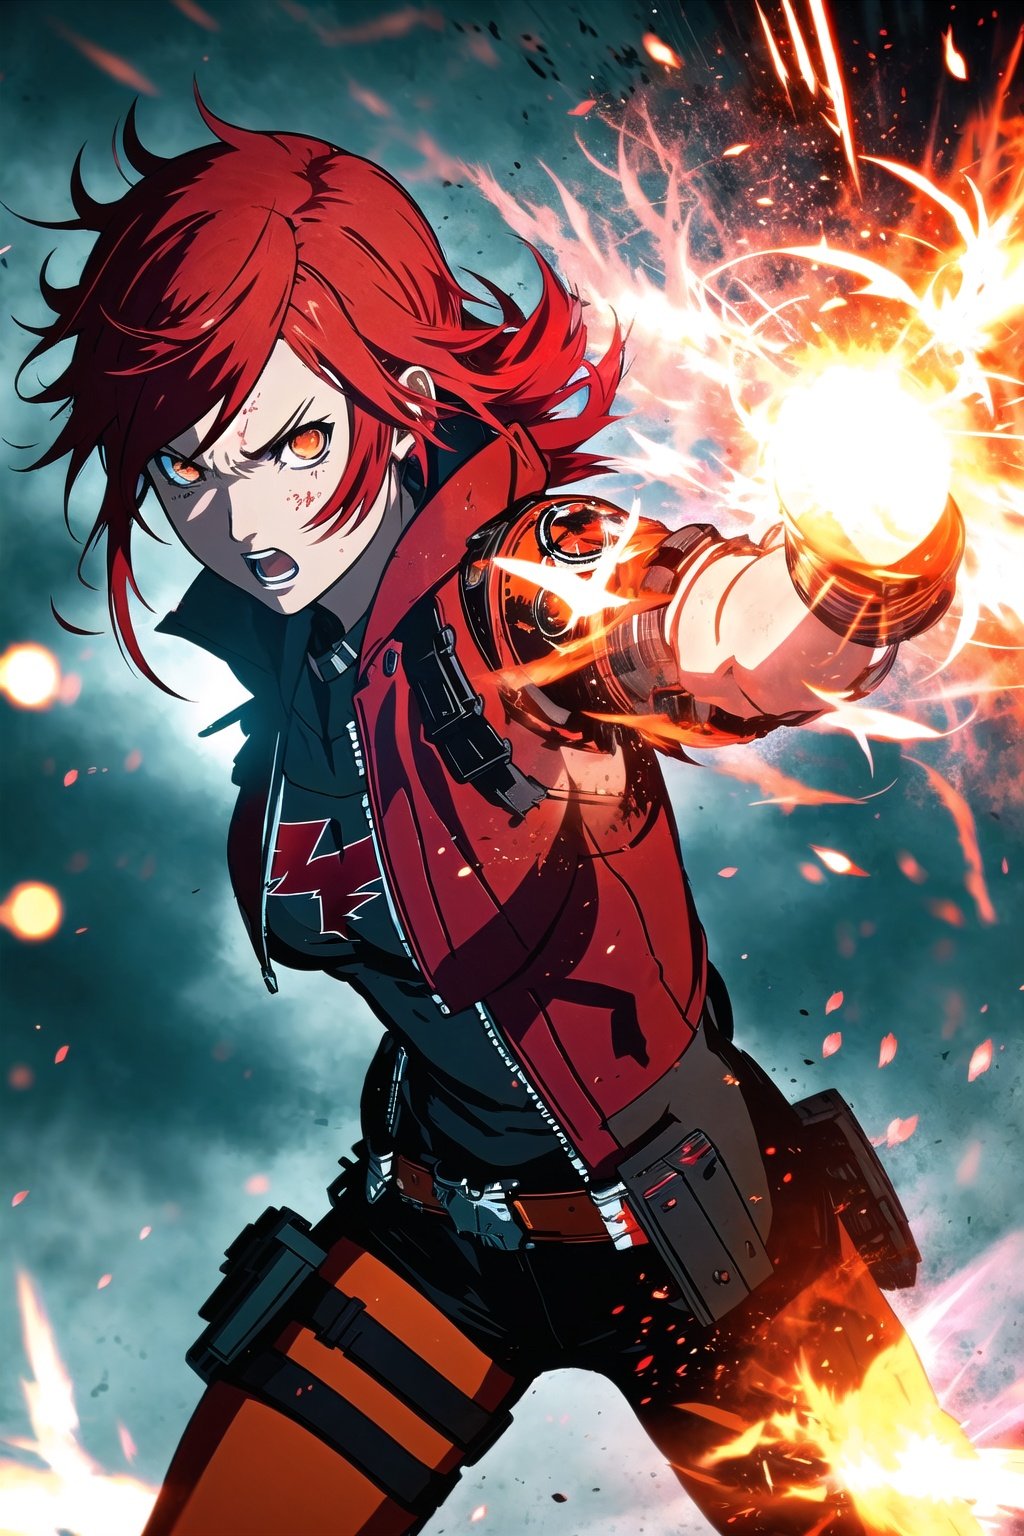 guiltys, angry, a girl, white eyes, red hair, fighting, upper body, (bokeh:1.1), depth of field, by Akihiko Yoshida, tracers, vfx, splashes, lightning, light particles, white background